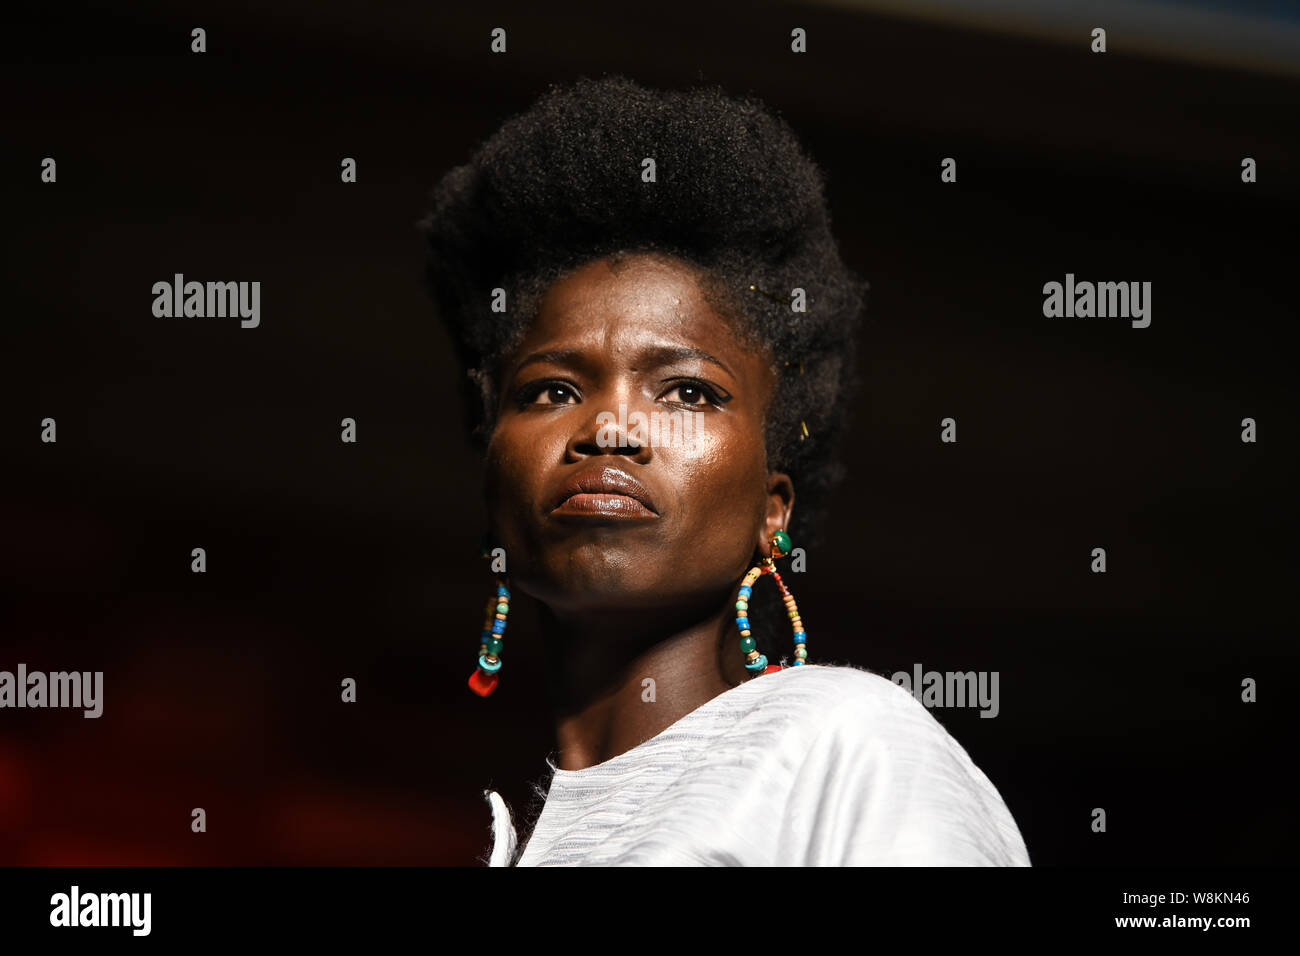 London, UK. 09th Aug, 2019. African Fashion Week London 2019 #AFWL2019 - backstage at Freemasons Hall on 9 August 2019, London, UK. Credit: Picture Capital/Alamy Live News Stock Photo